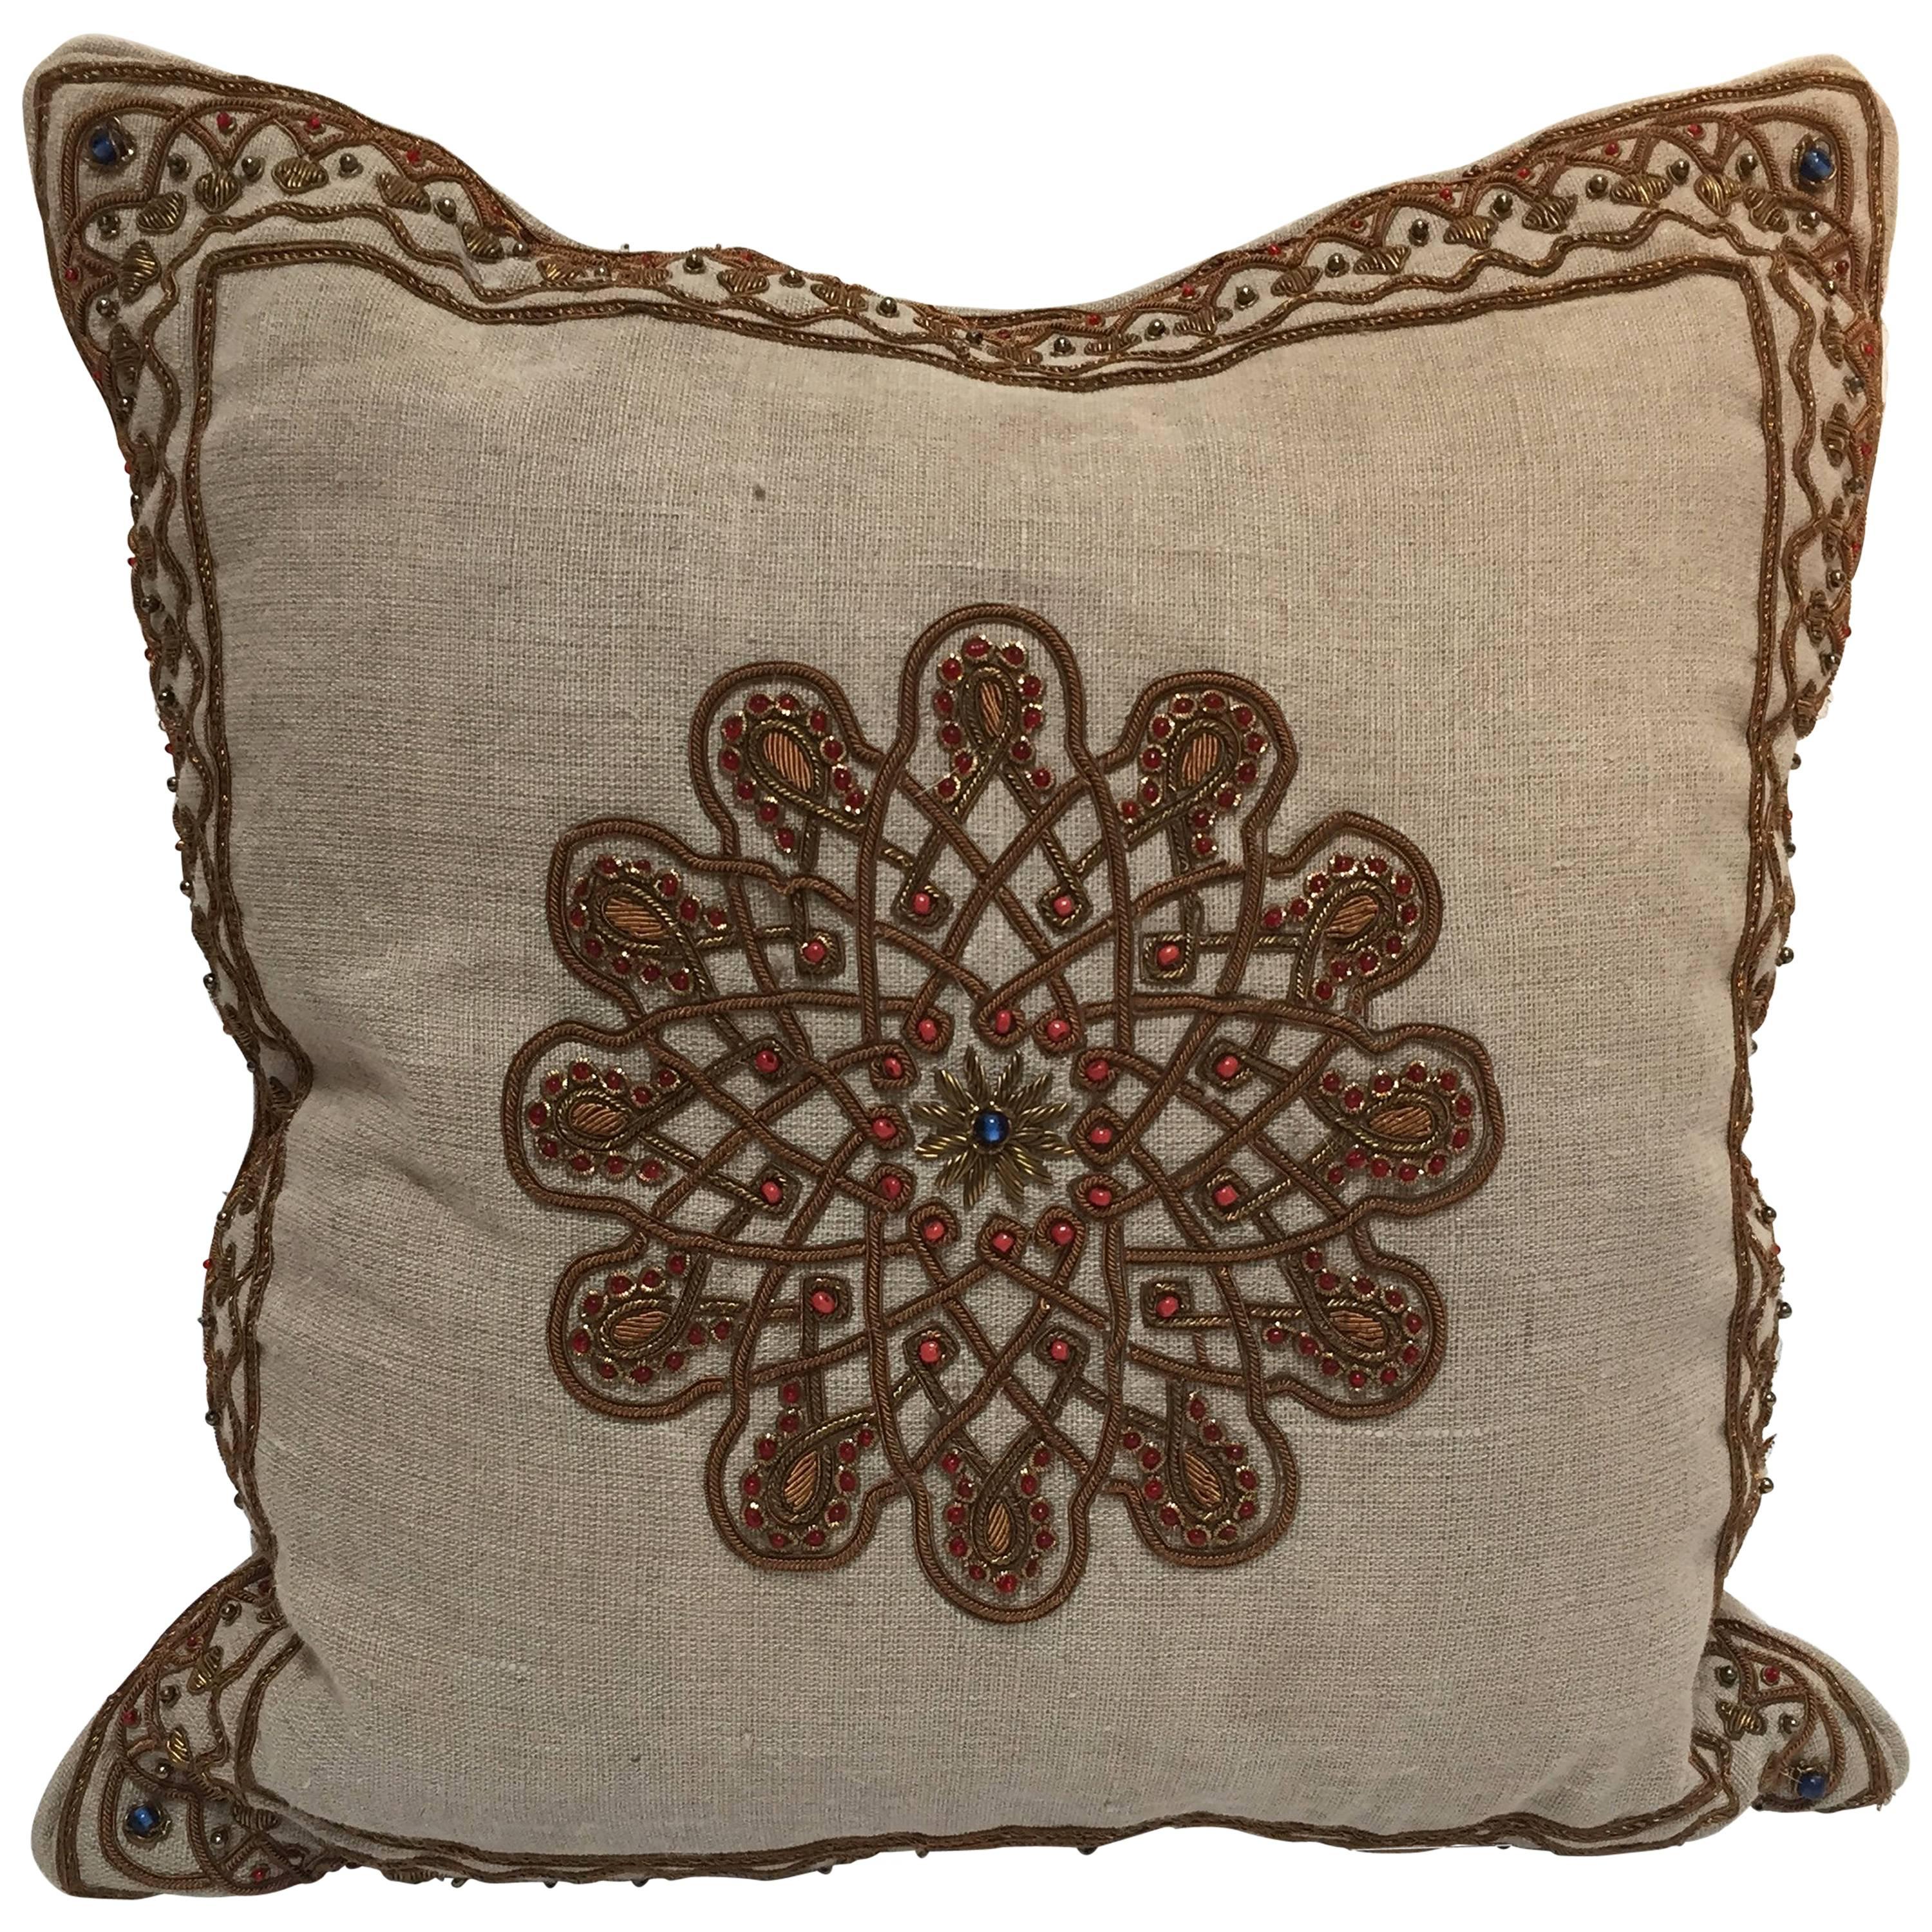 Throw Decorative Accent Pillow Embroidered with Moorish Metallic Threads Design